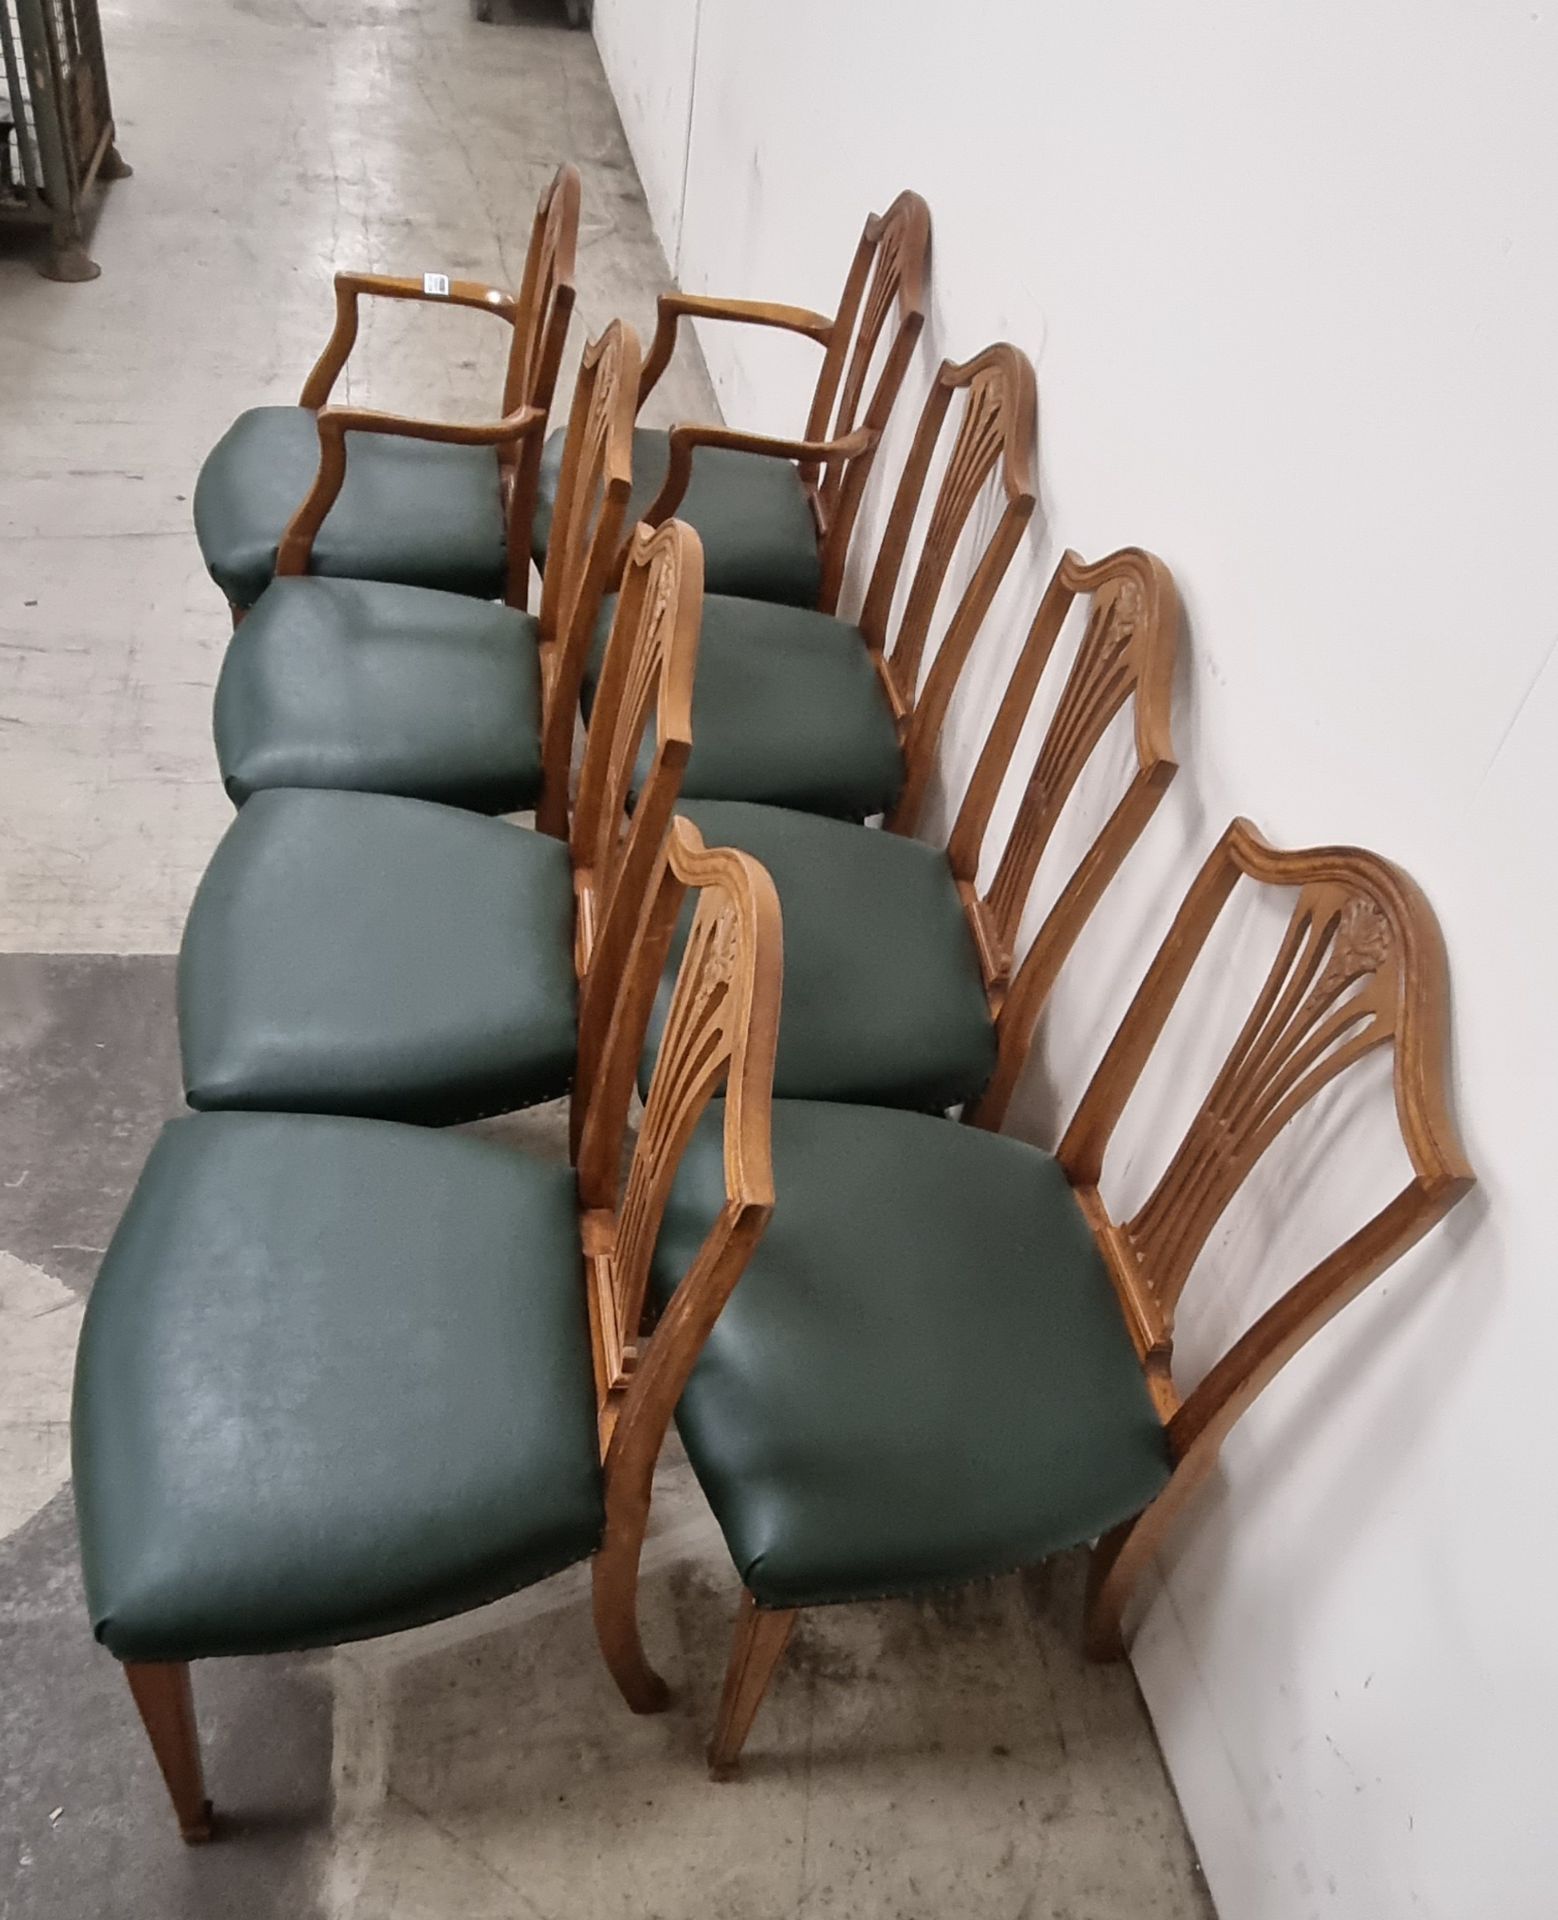 8x 1970 -1980's Wooden chairs - Image 2 of 4